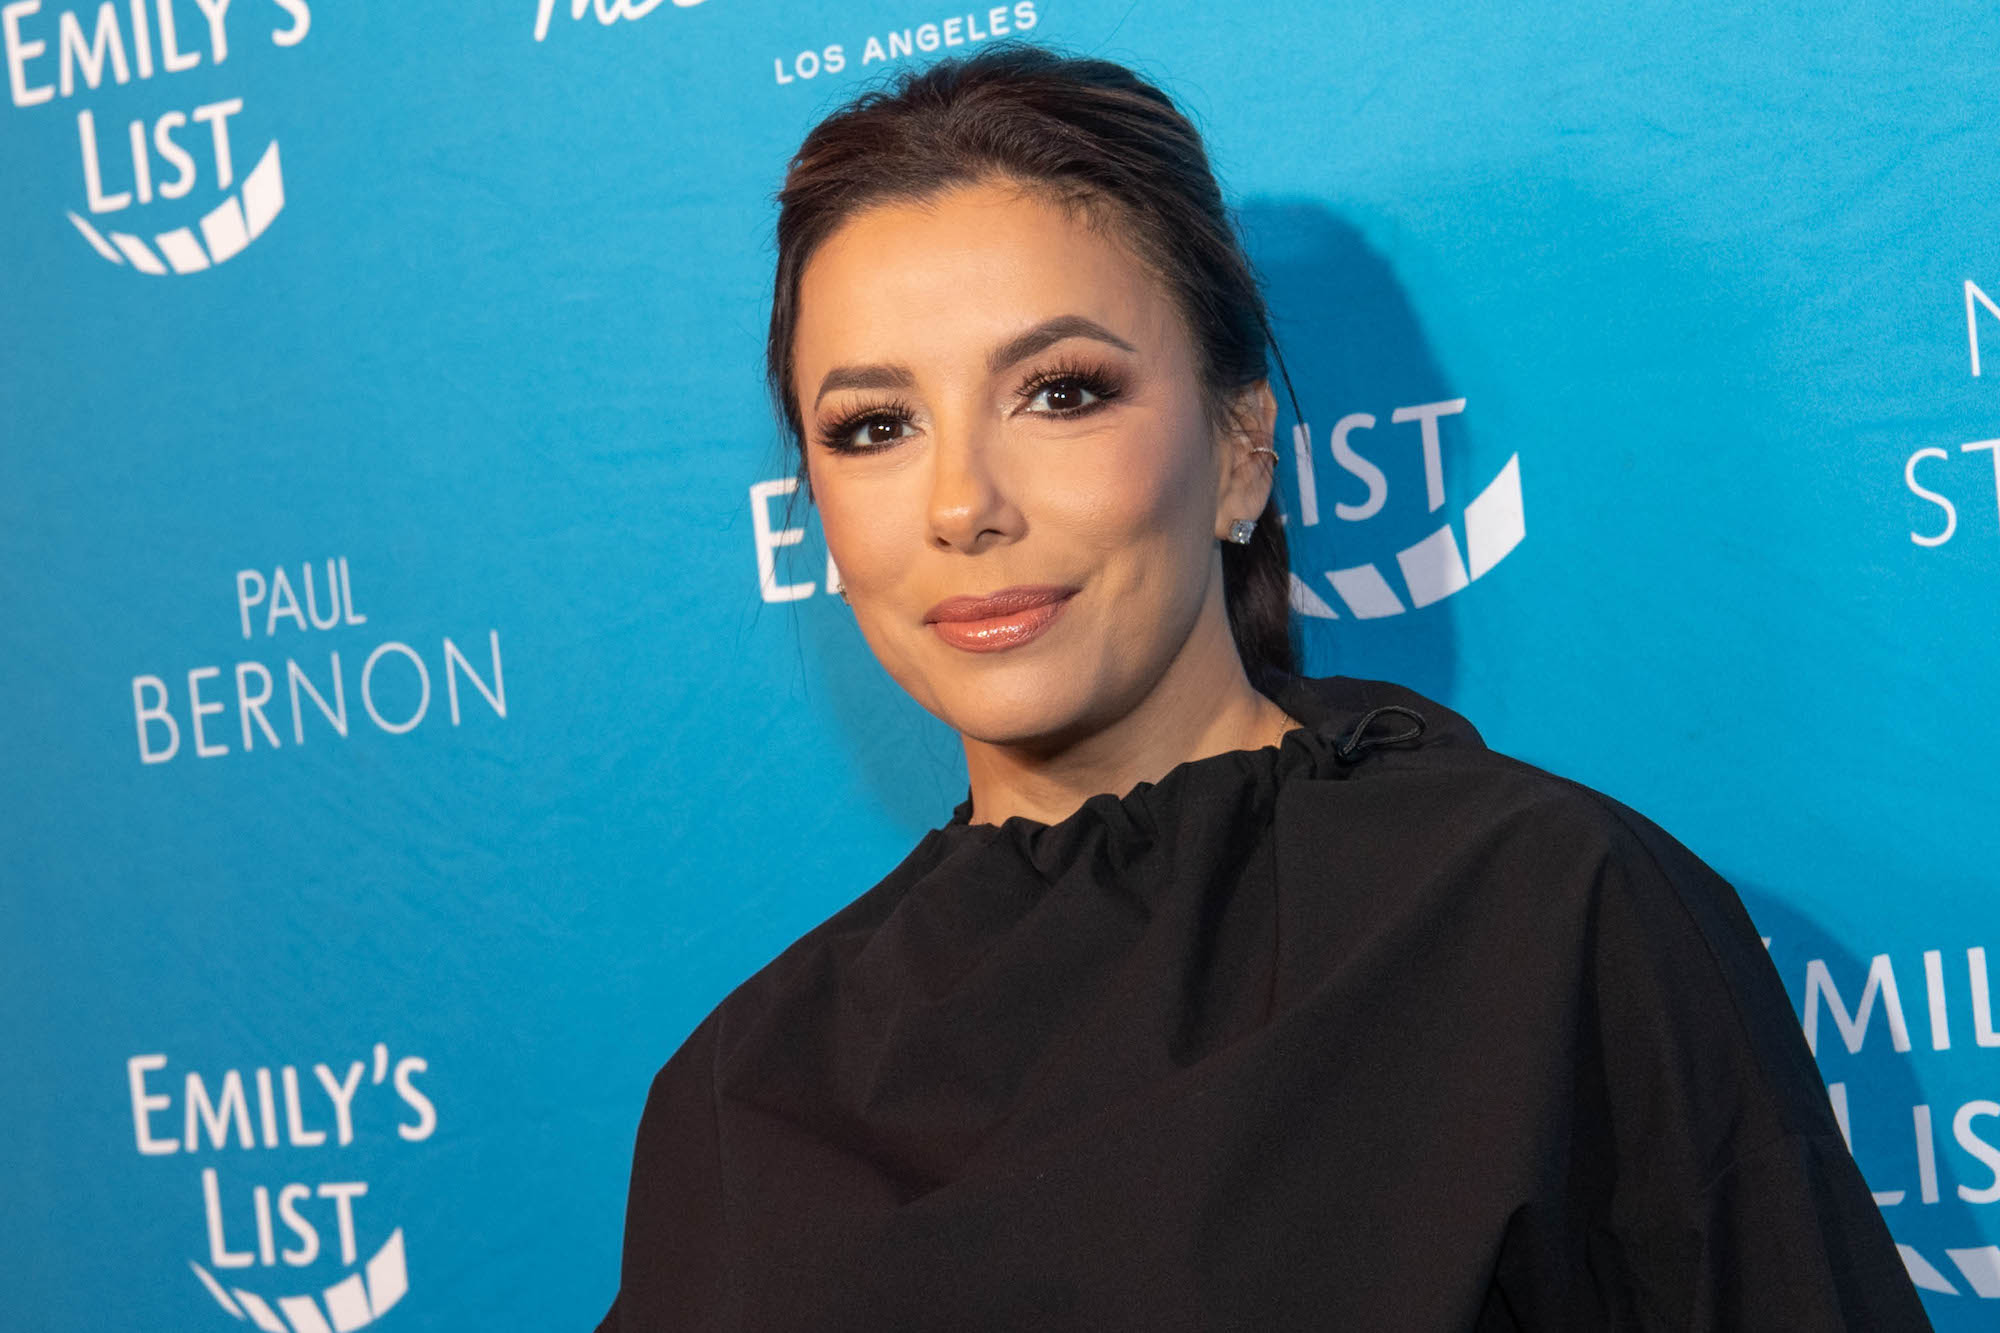 Eva Longoria smiling in front of a blue background